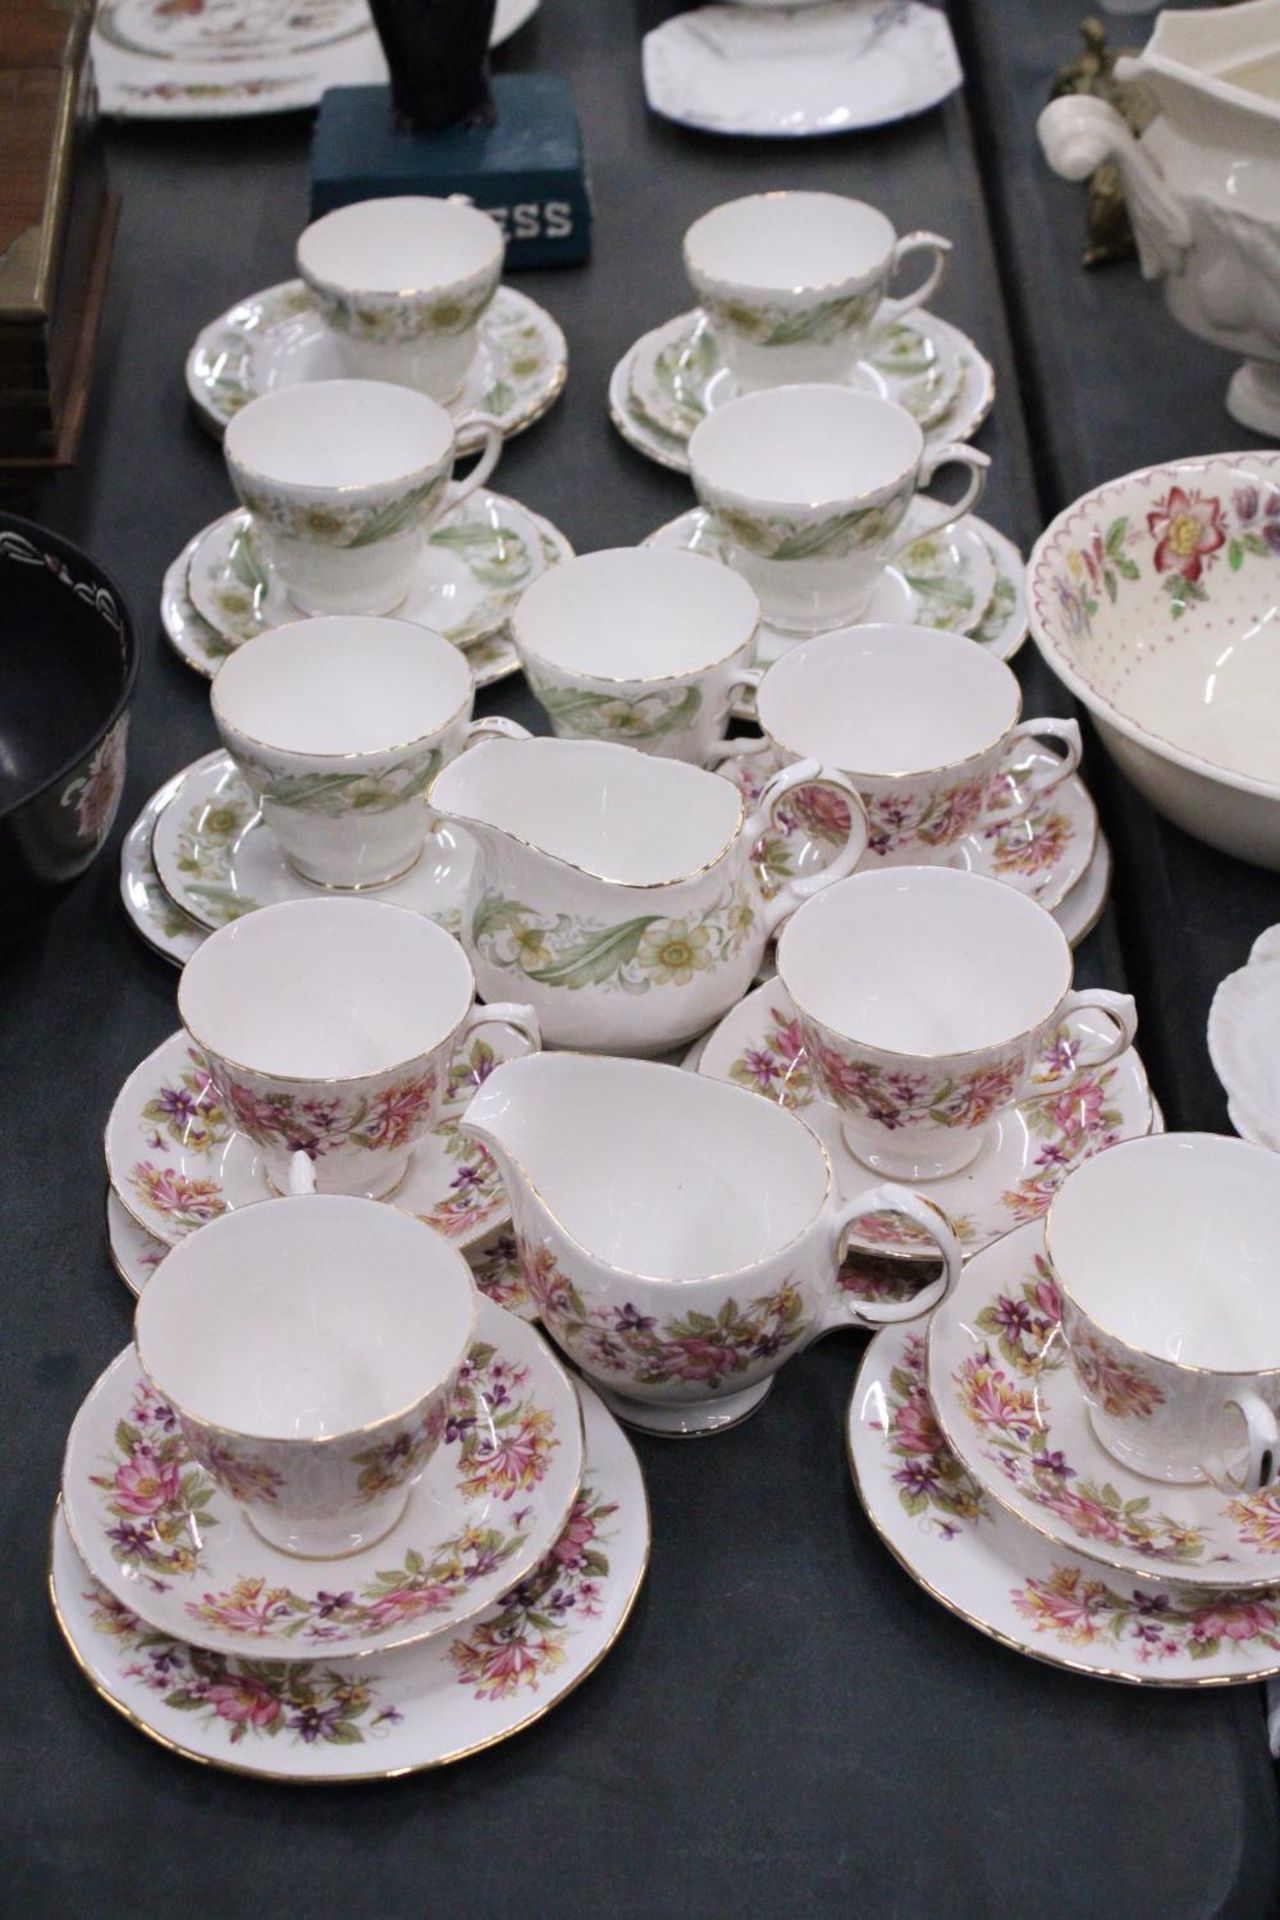 A QUANTITY OF CHINA CUPS, SAUCERS, SIDE PLATES AND CREAM JUGS BY COLCLOUGH AND DUCHESS